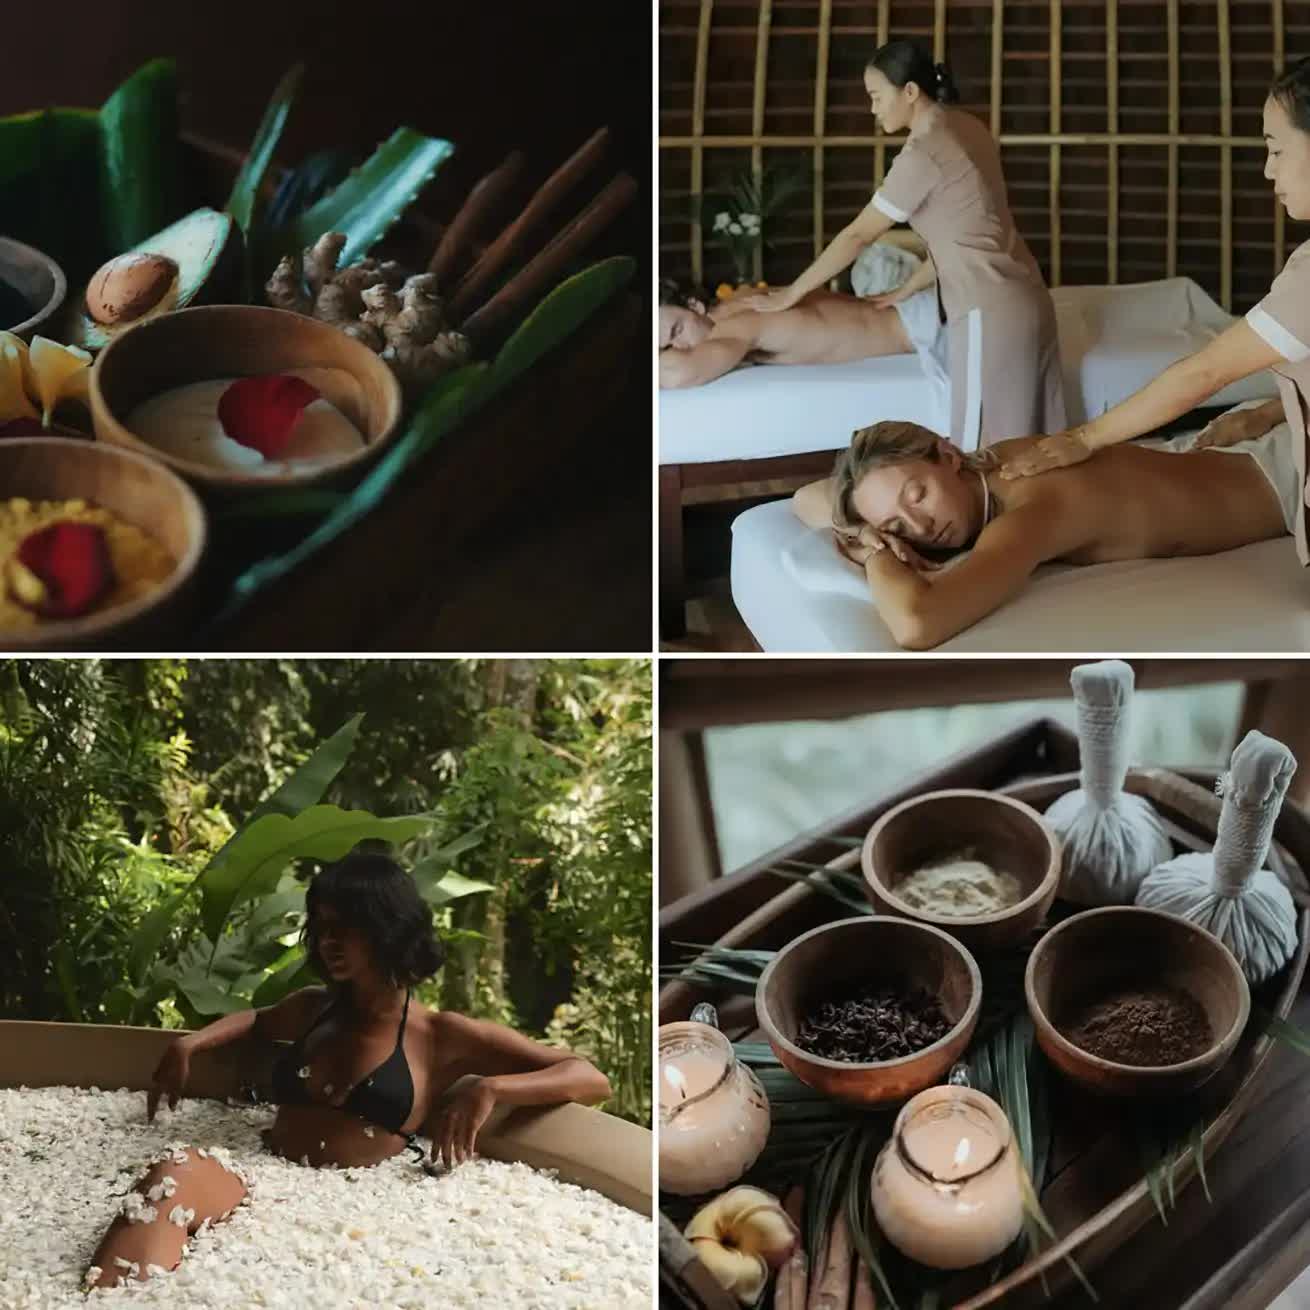 Couples massage, baths and spice therapy at Mekar Ubud